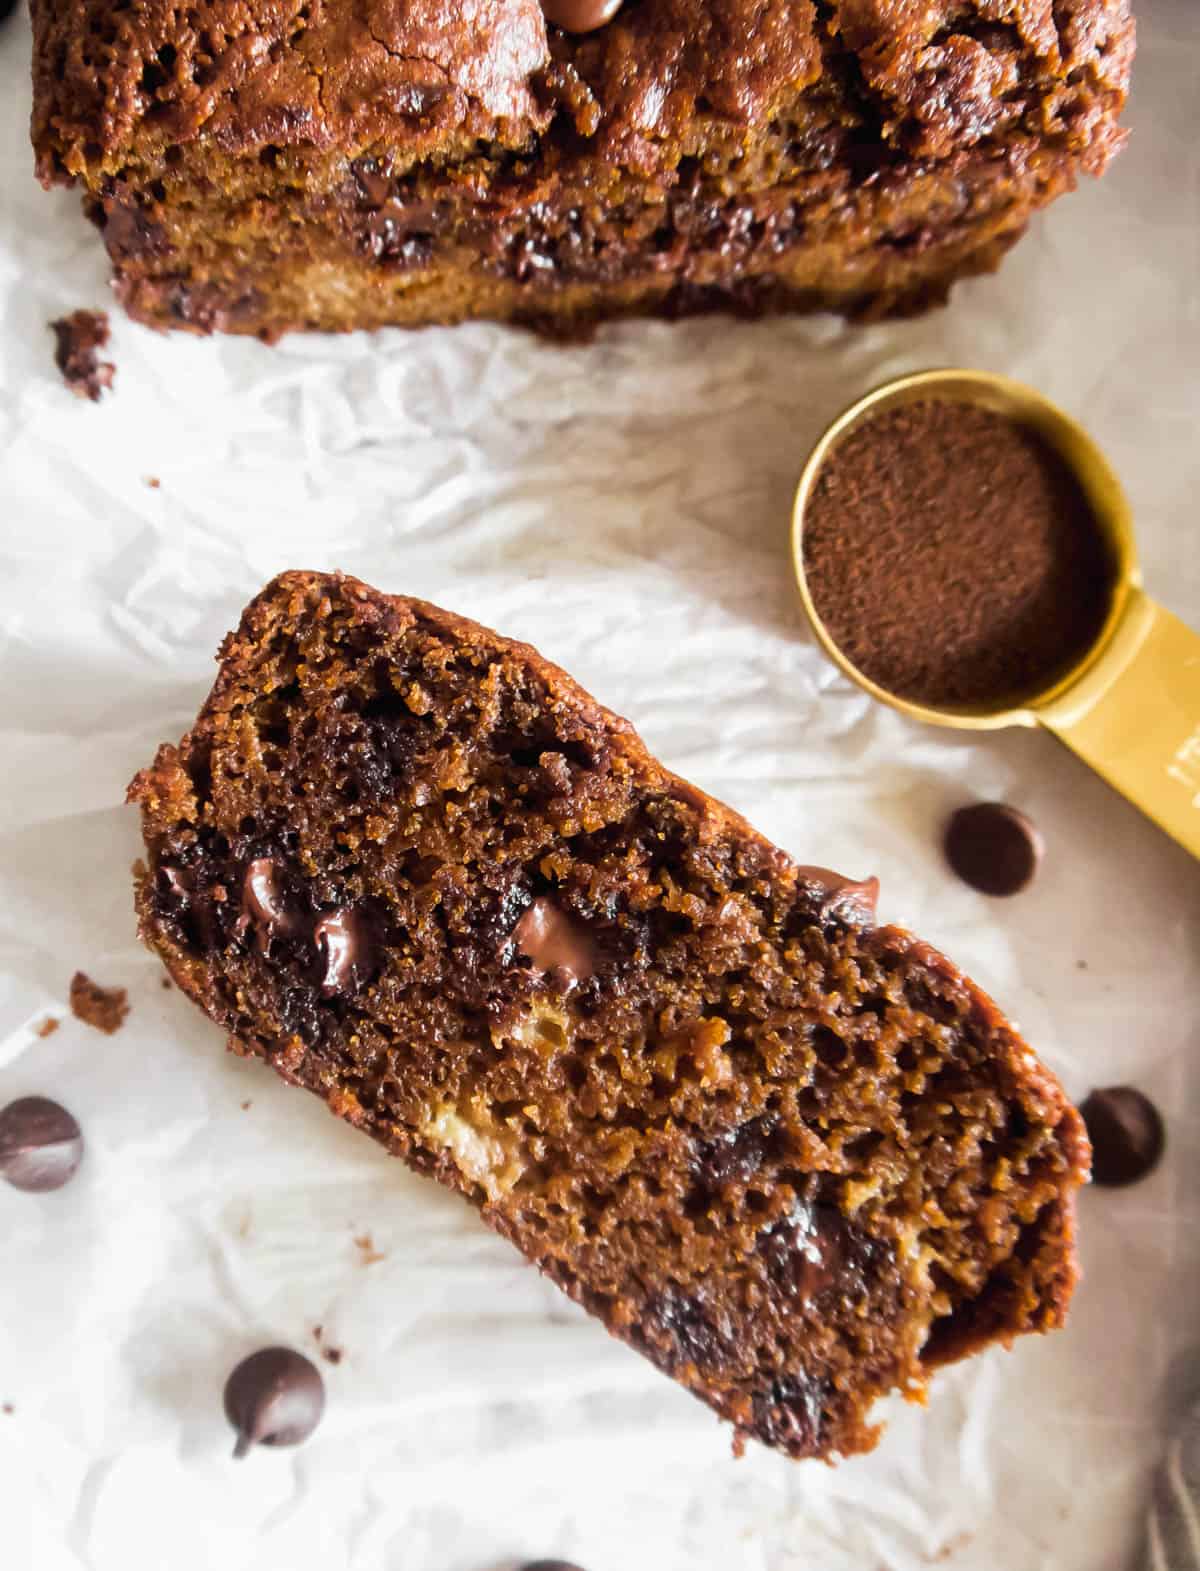 Paleo recipe for banana bread with espresso and chocolate chips.